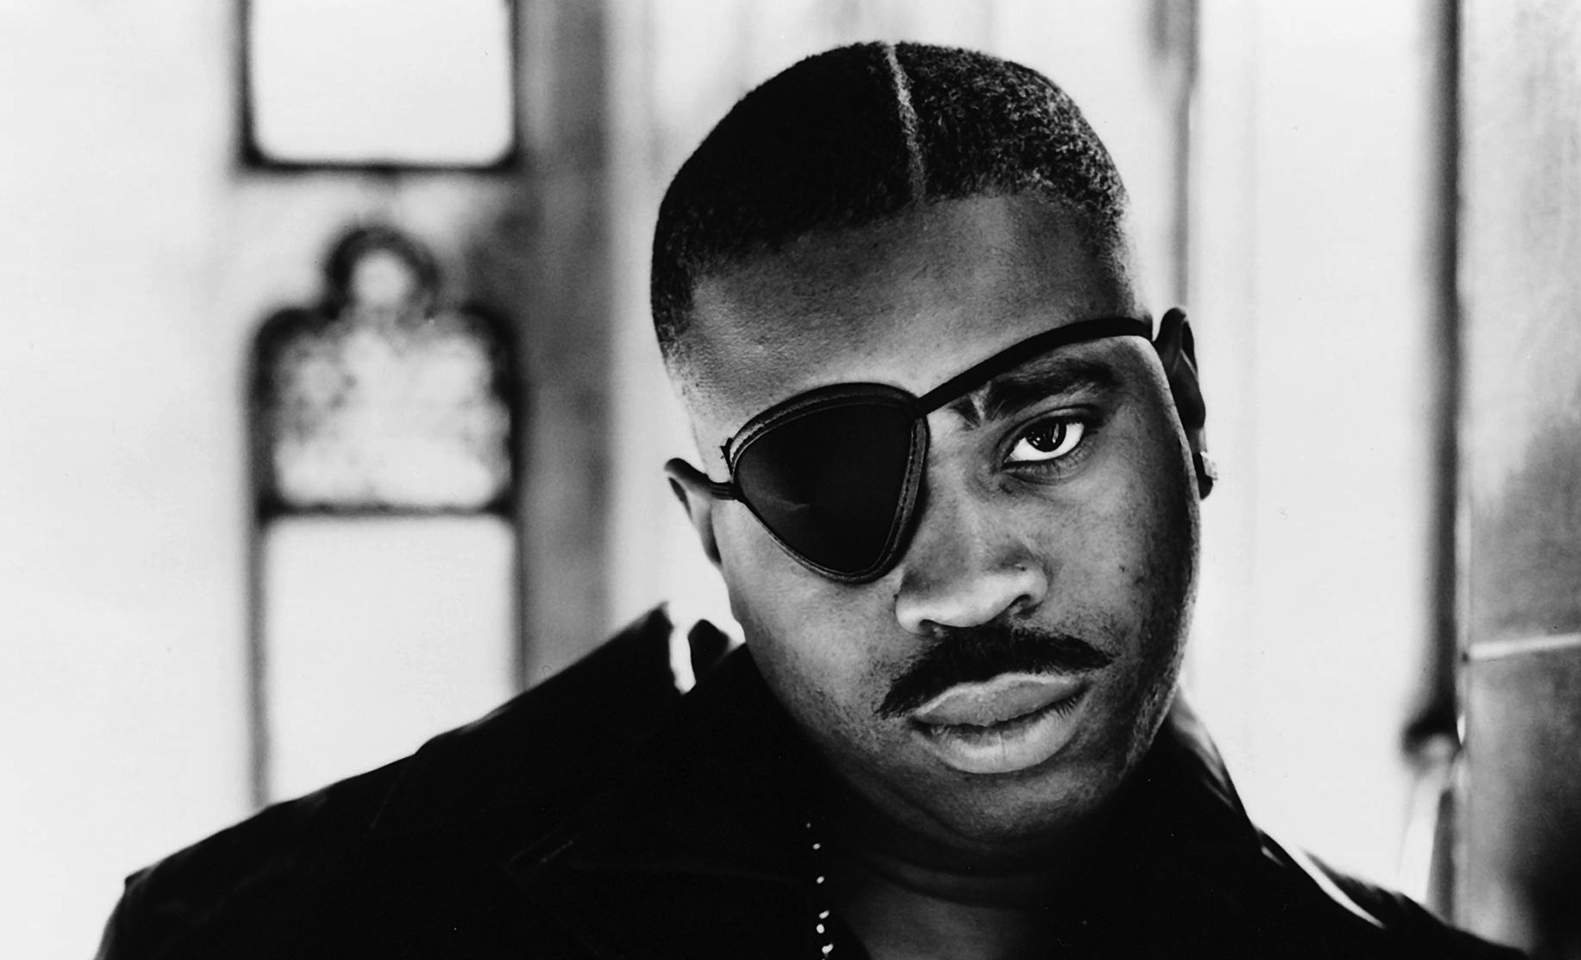 Slick Rick Finally Becomes A U.S. Citizen After 23-Year Legal Process